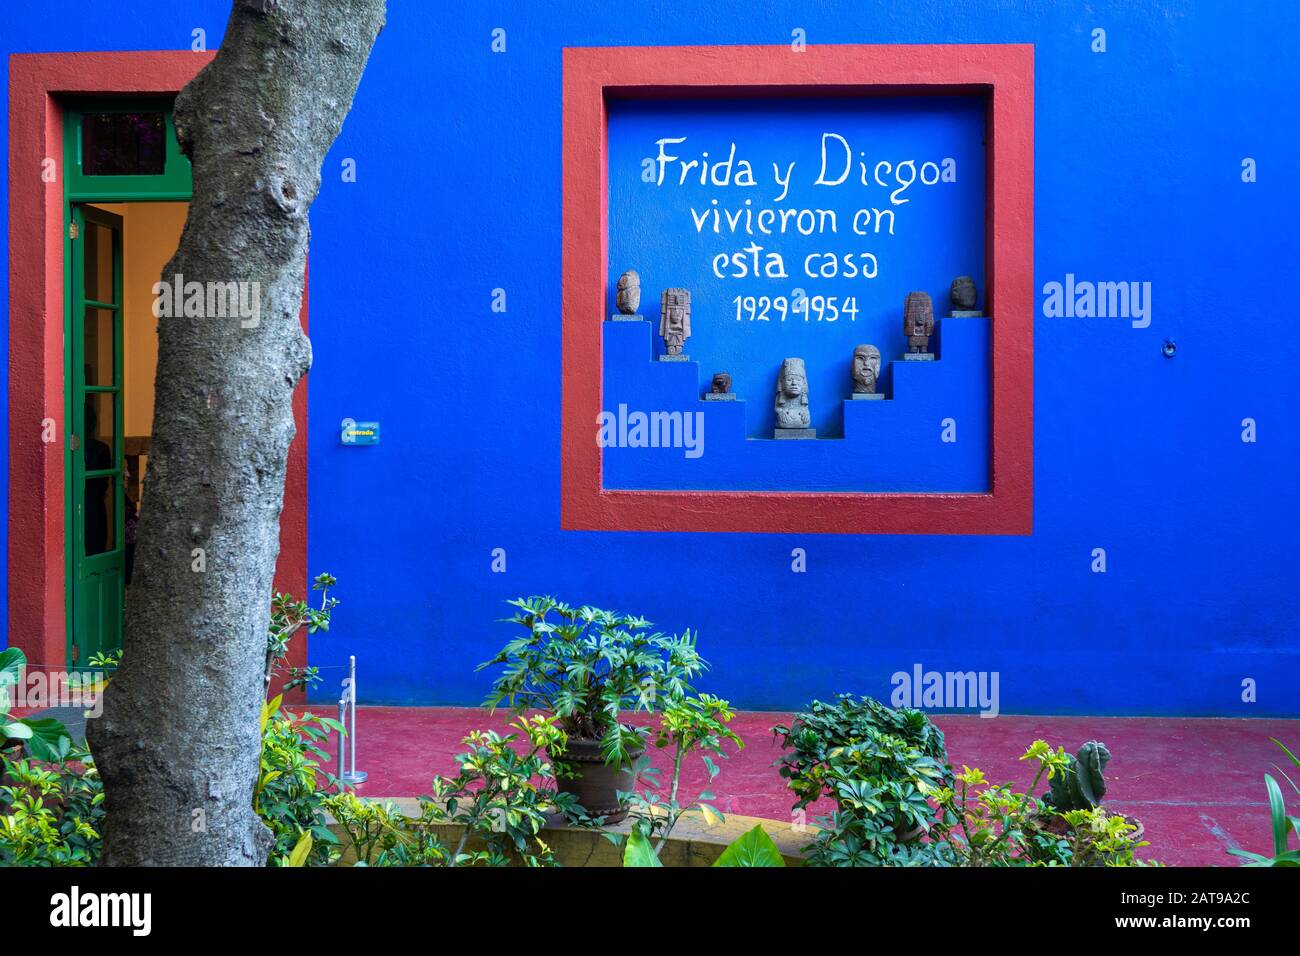 The famous Frida Kahlo Museum, also known as the Casa Azul (Blue House) in Mexico City, Mexico. Stock Photo